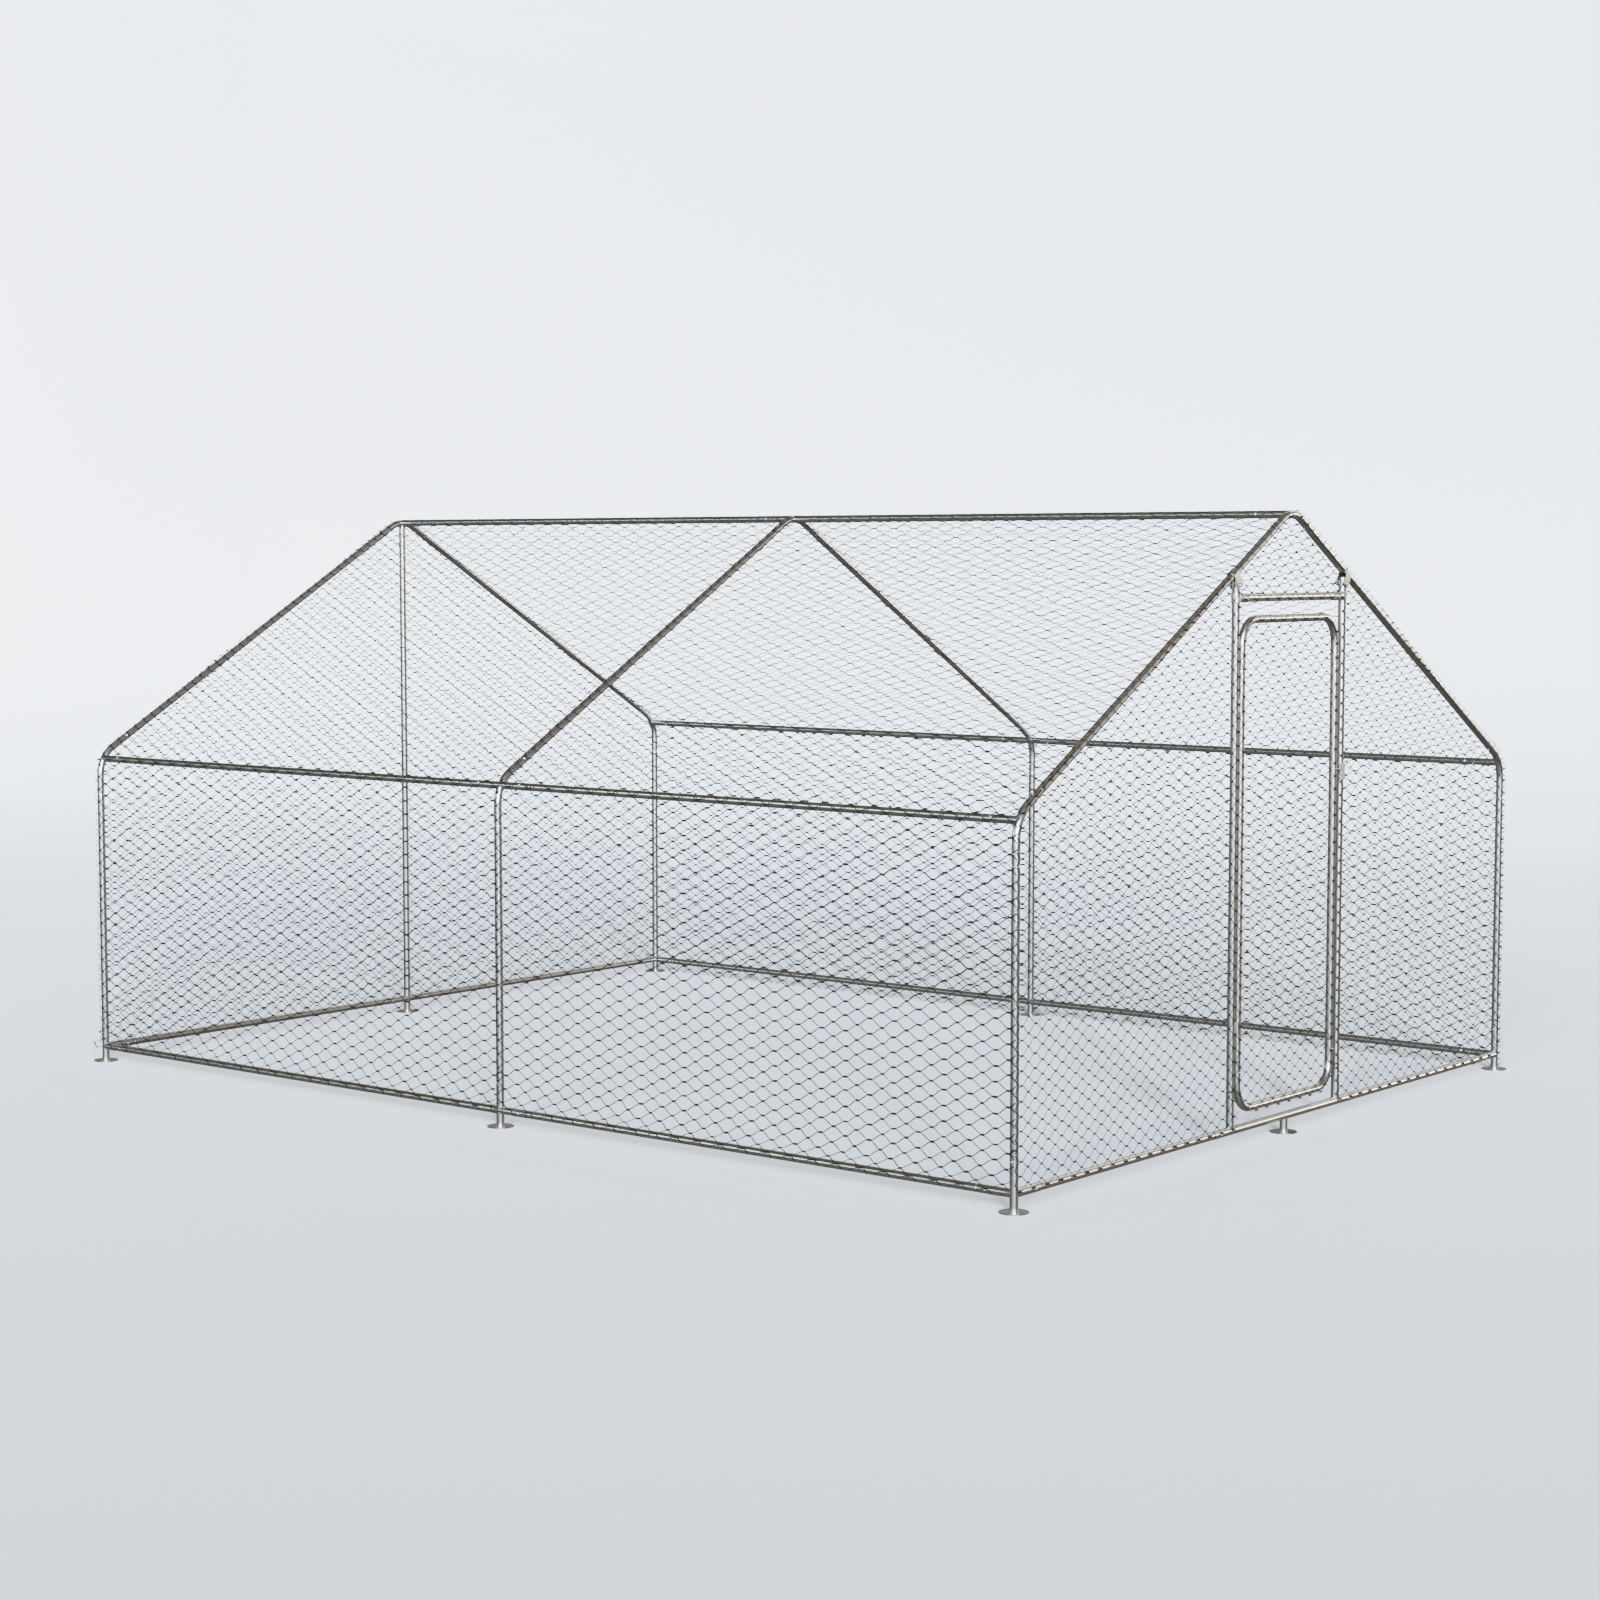 Large Metal Exercise Chicken Coop Walk-in Metal Poultry Cage Spire Shaped Coop Chicken Run with Waterproof Cover